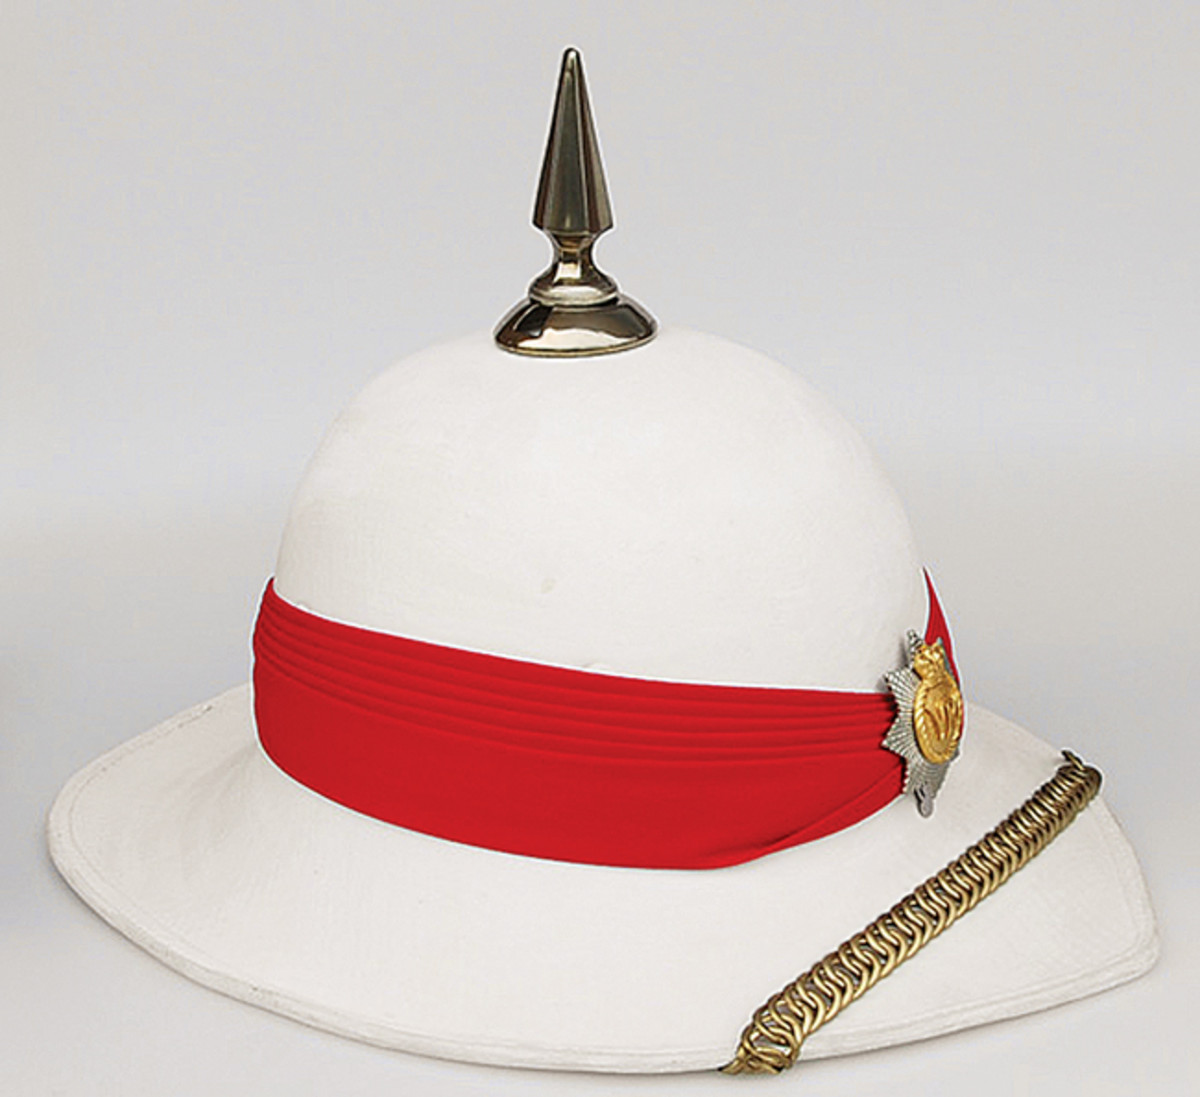  This modern “Wolseley” Pattern helmet is still used by the Royal Canadian Regiment on the parade ground. Externally it looks little different from the cork helmets that were introduced more than 100 years ago, but in fact it is made of fiberglass!